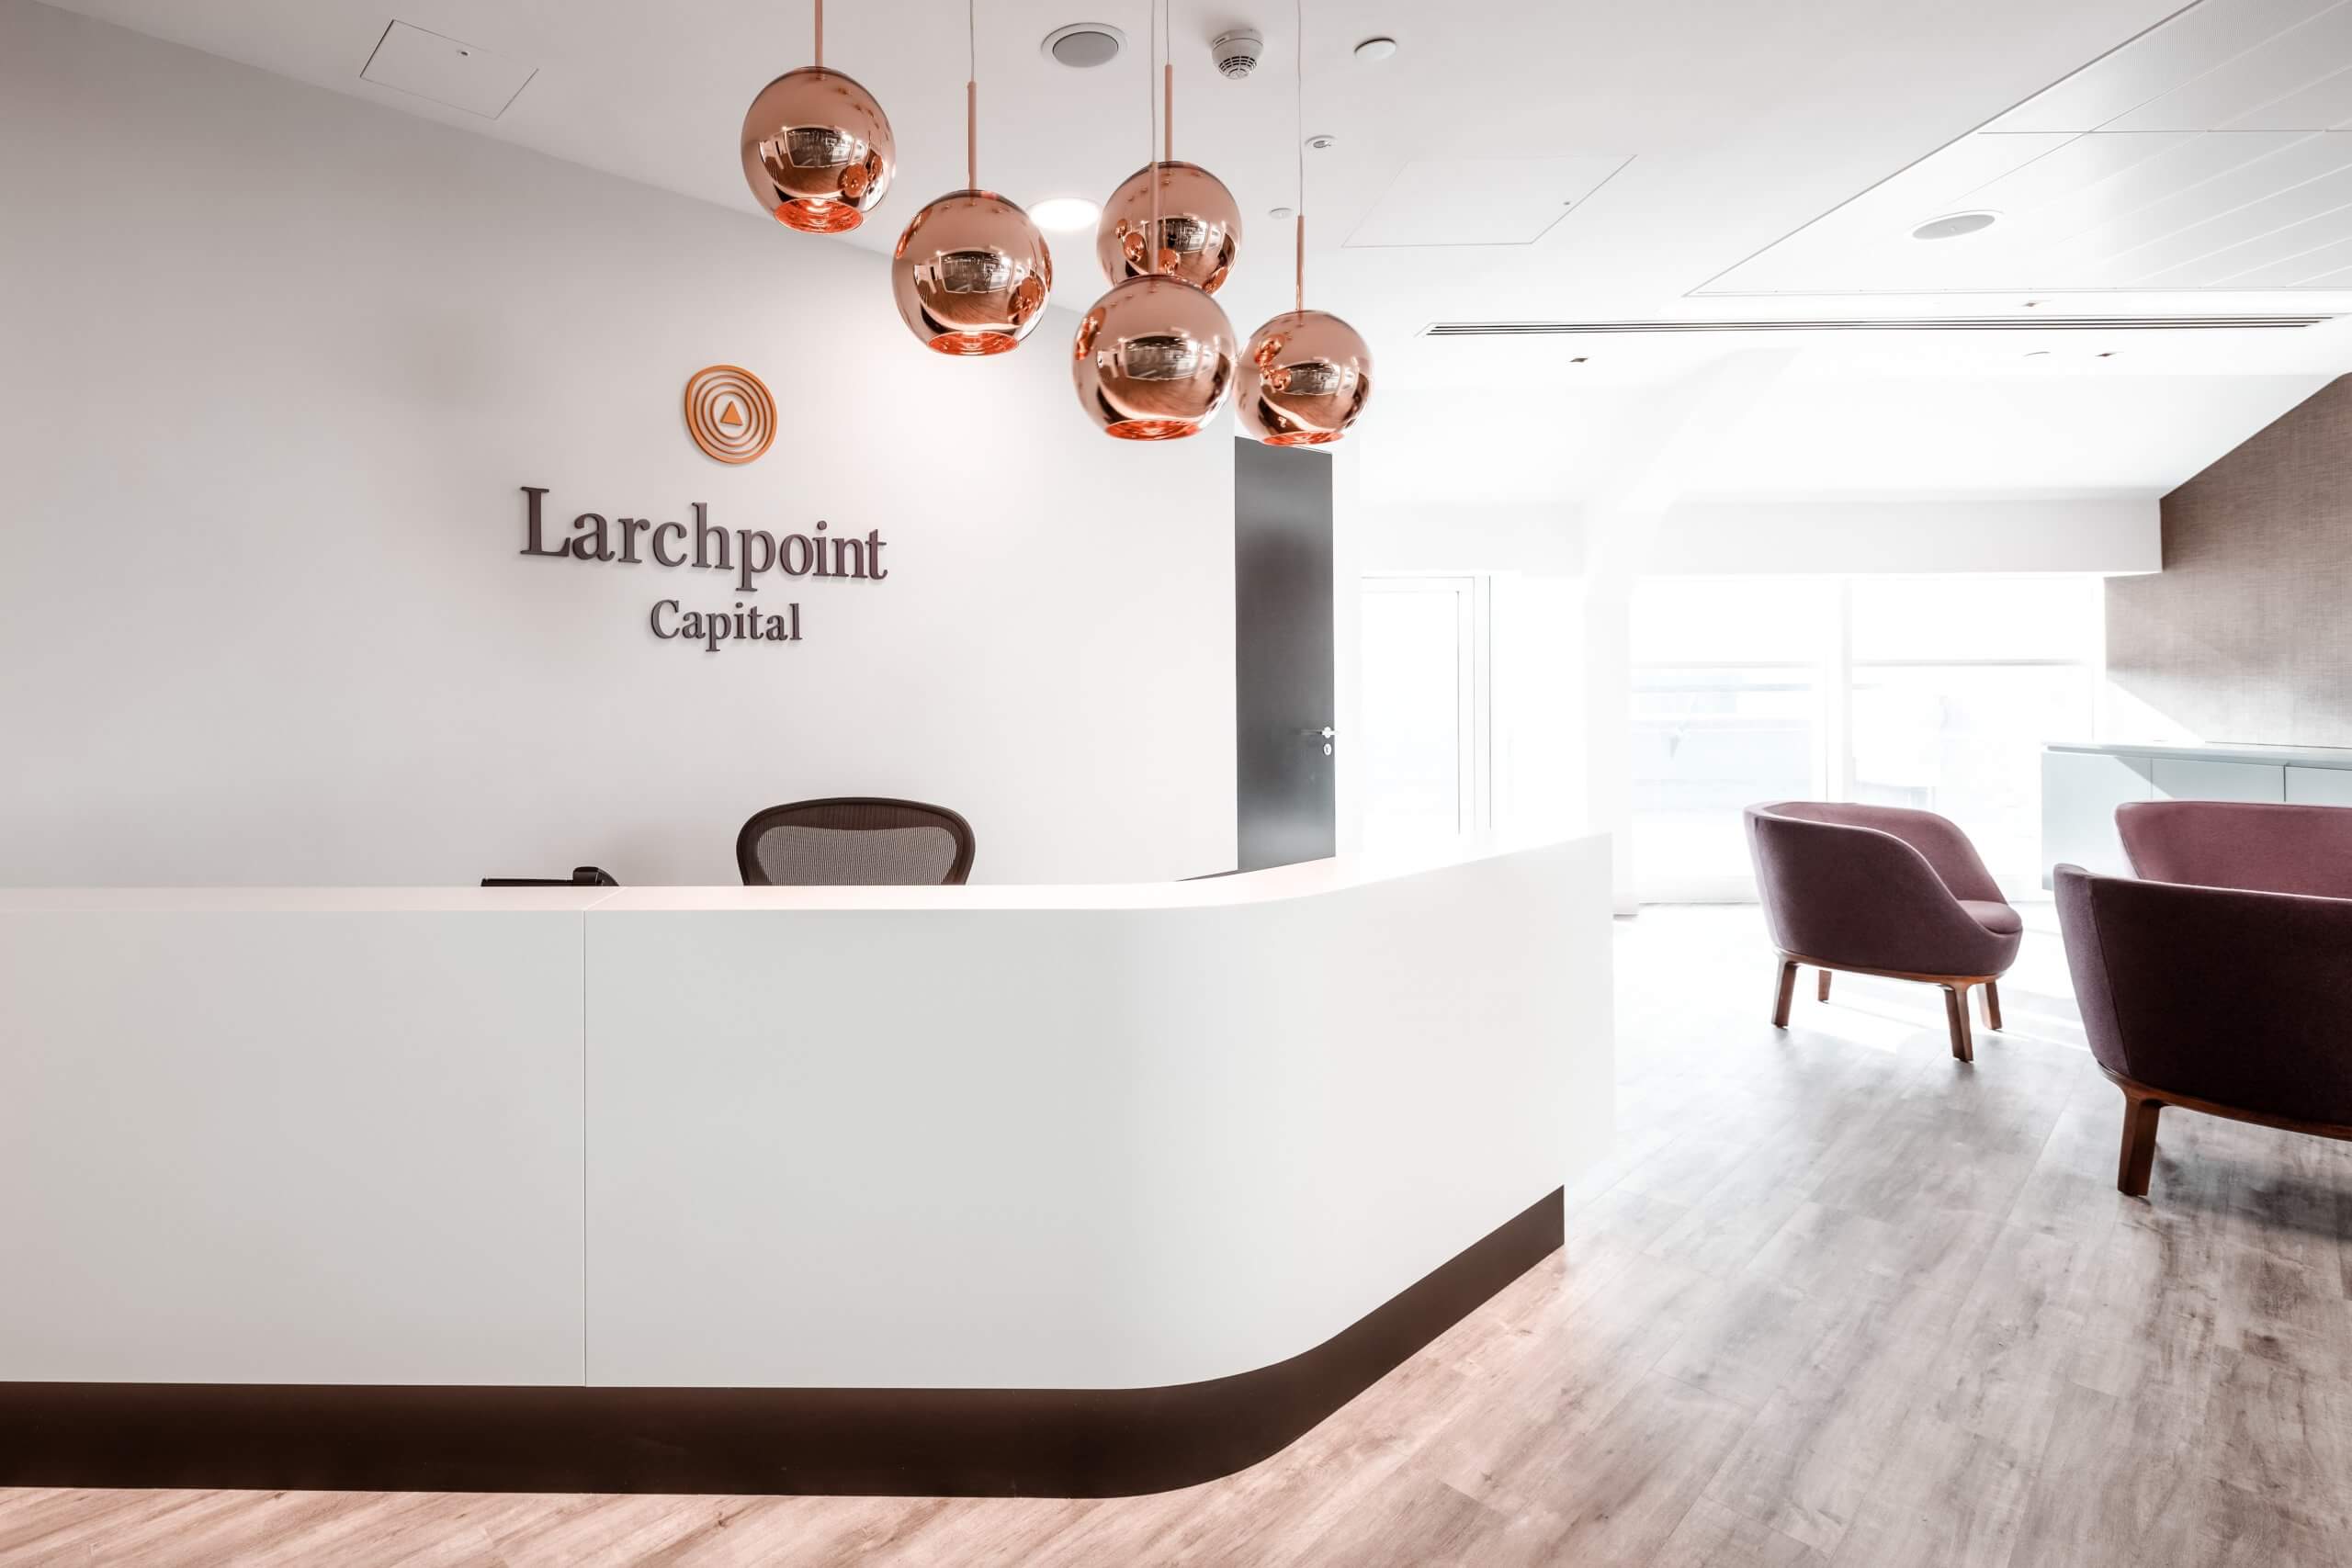 Larchpoint Capital Logo with copper light fixtures above a reception desk.